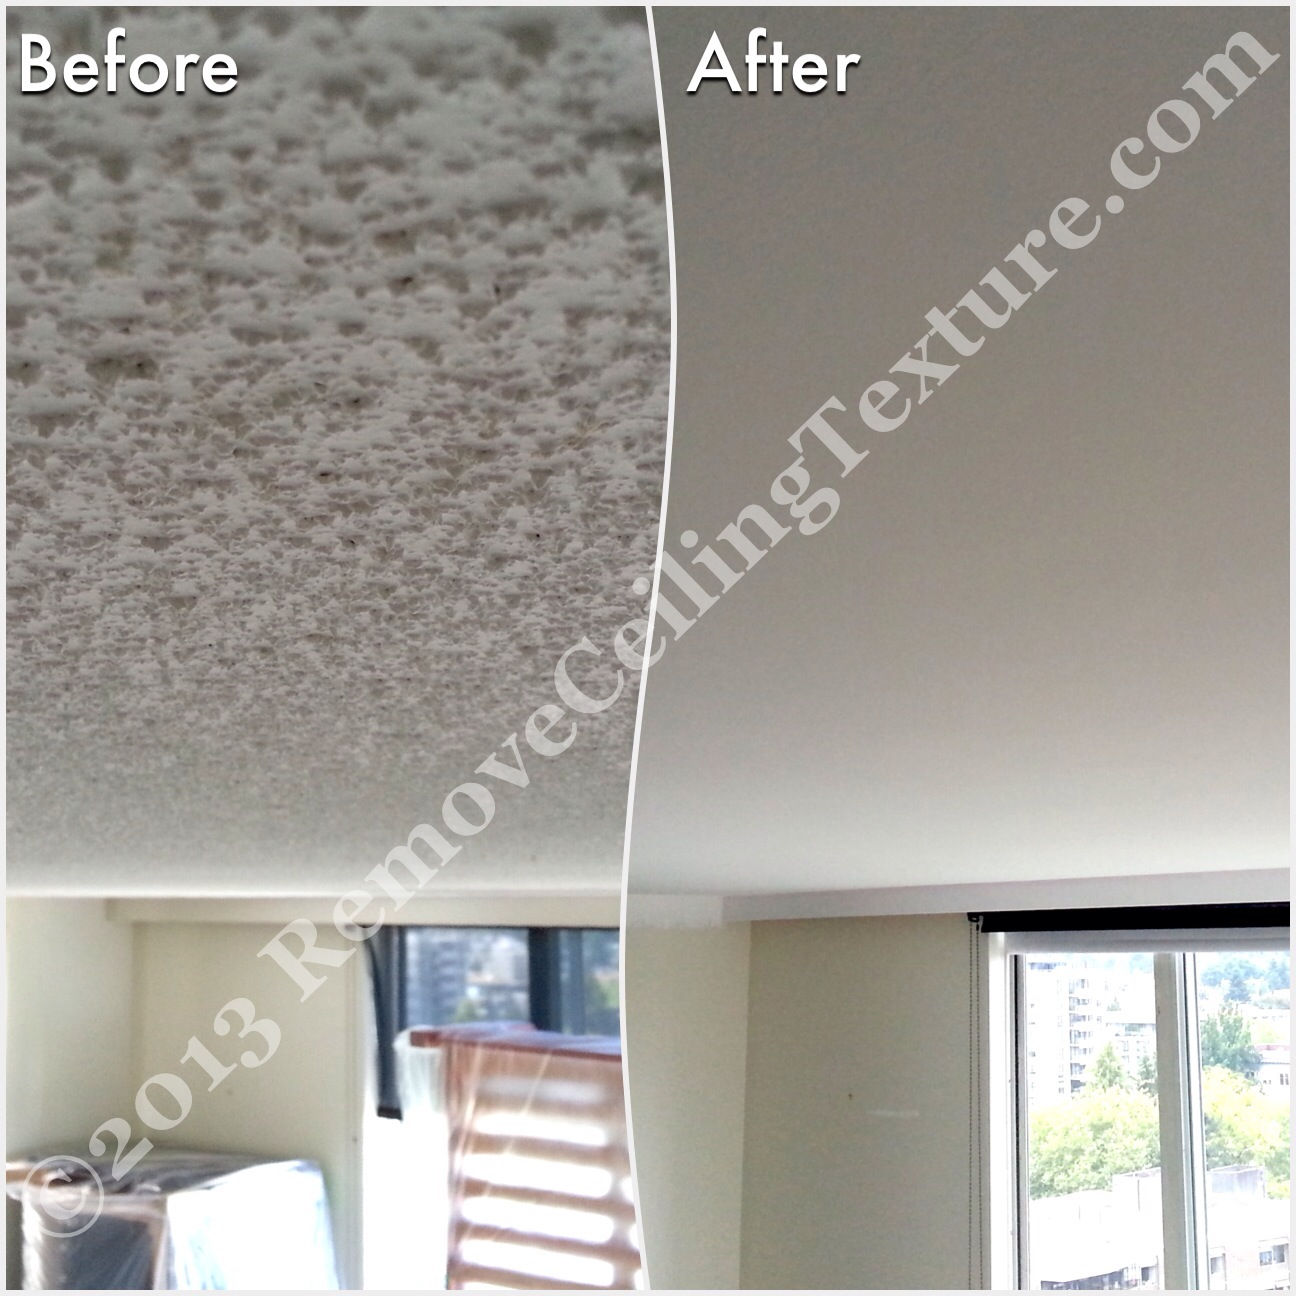 Popcorn Ceilings: Bedroom ceiling renovations at 2628 Ash Street, Vancouver.